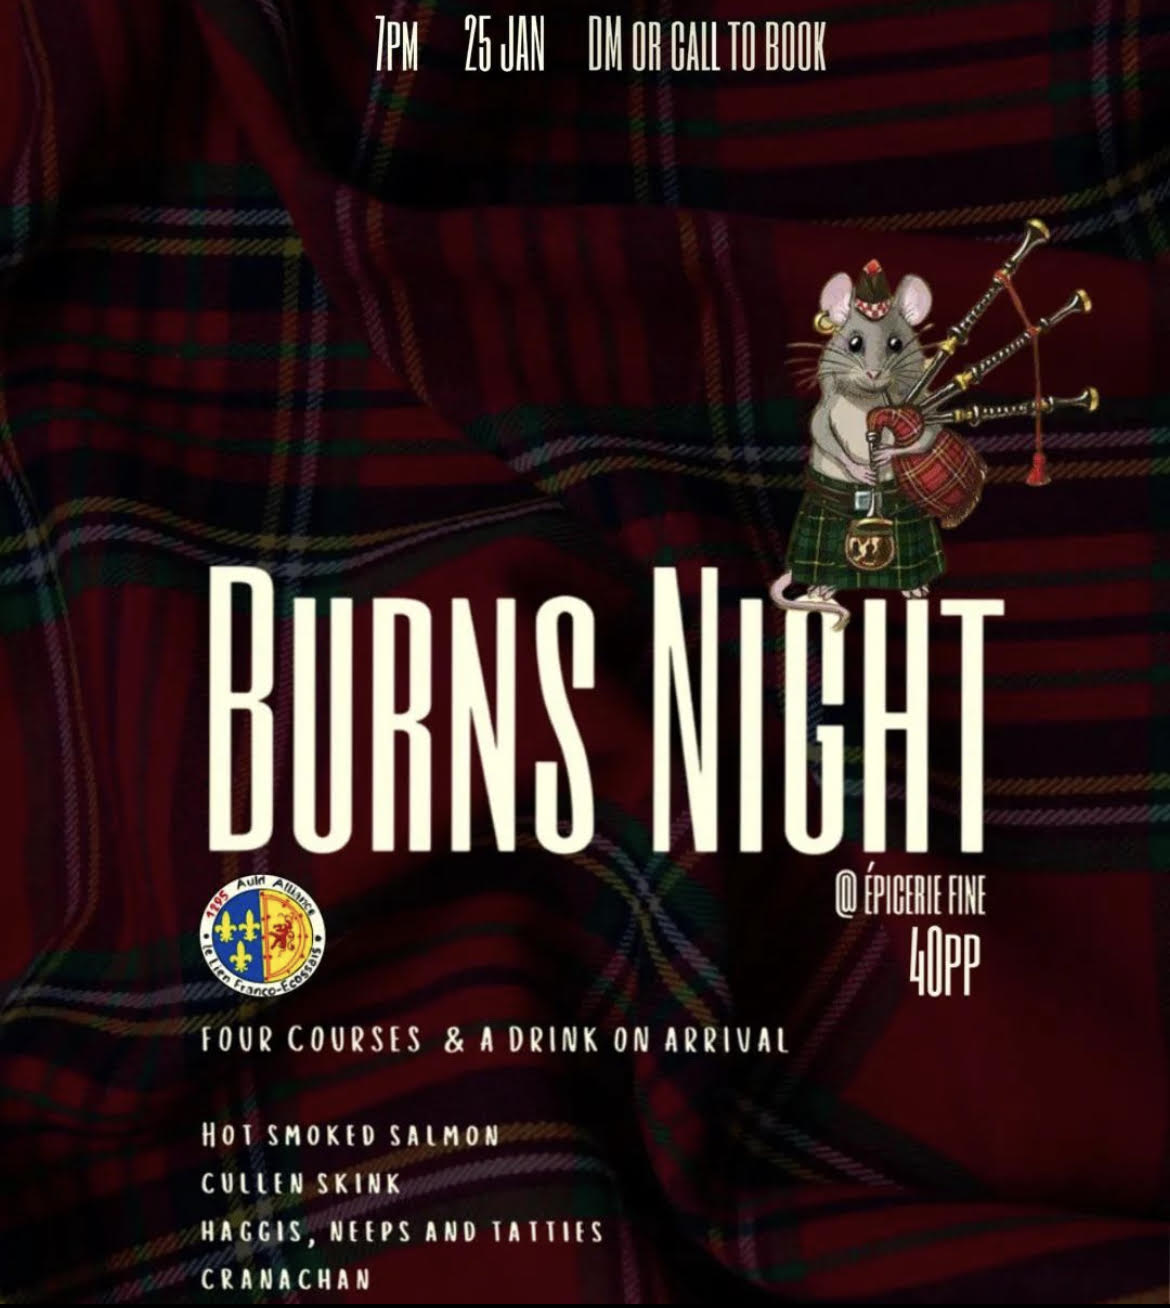 Burns Night - Liverpool - The Guide Liverpool